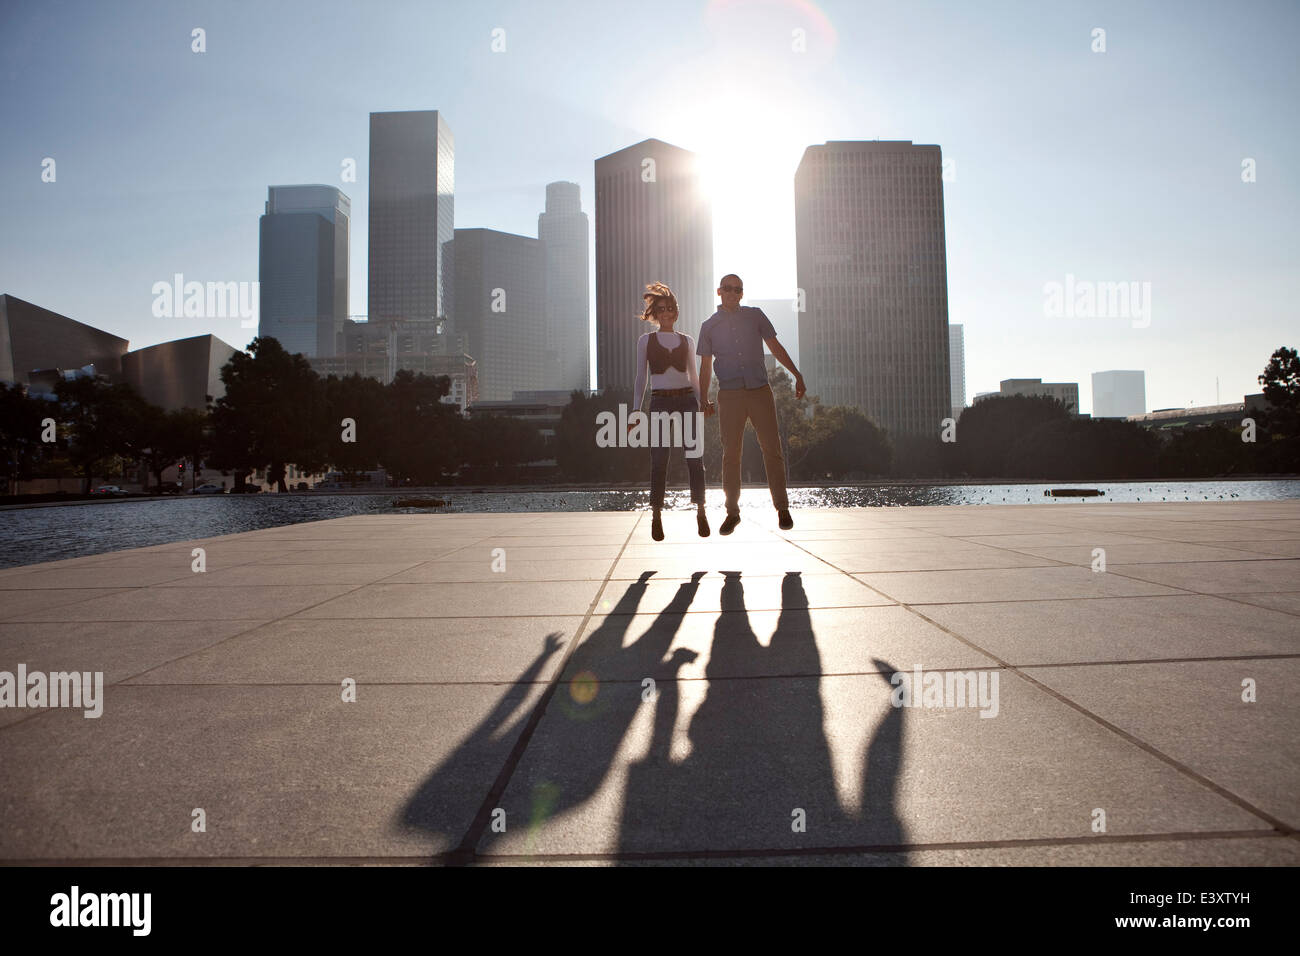 Couple casting shadows on urban waterfront Stock Photo